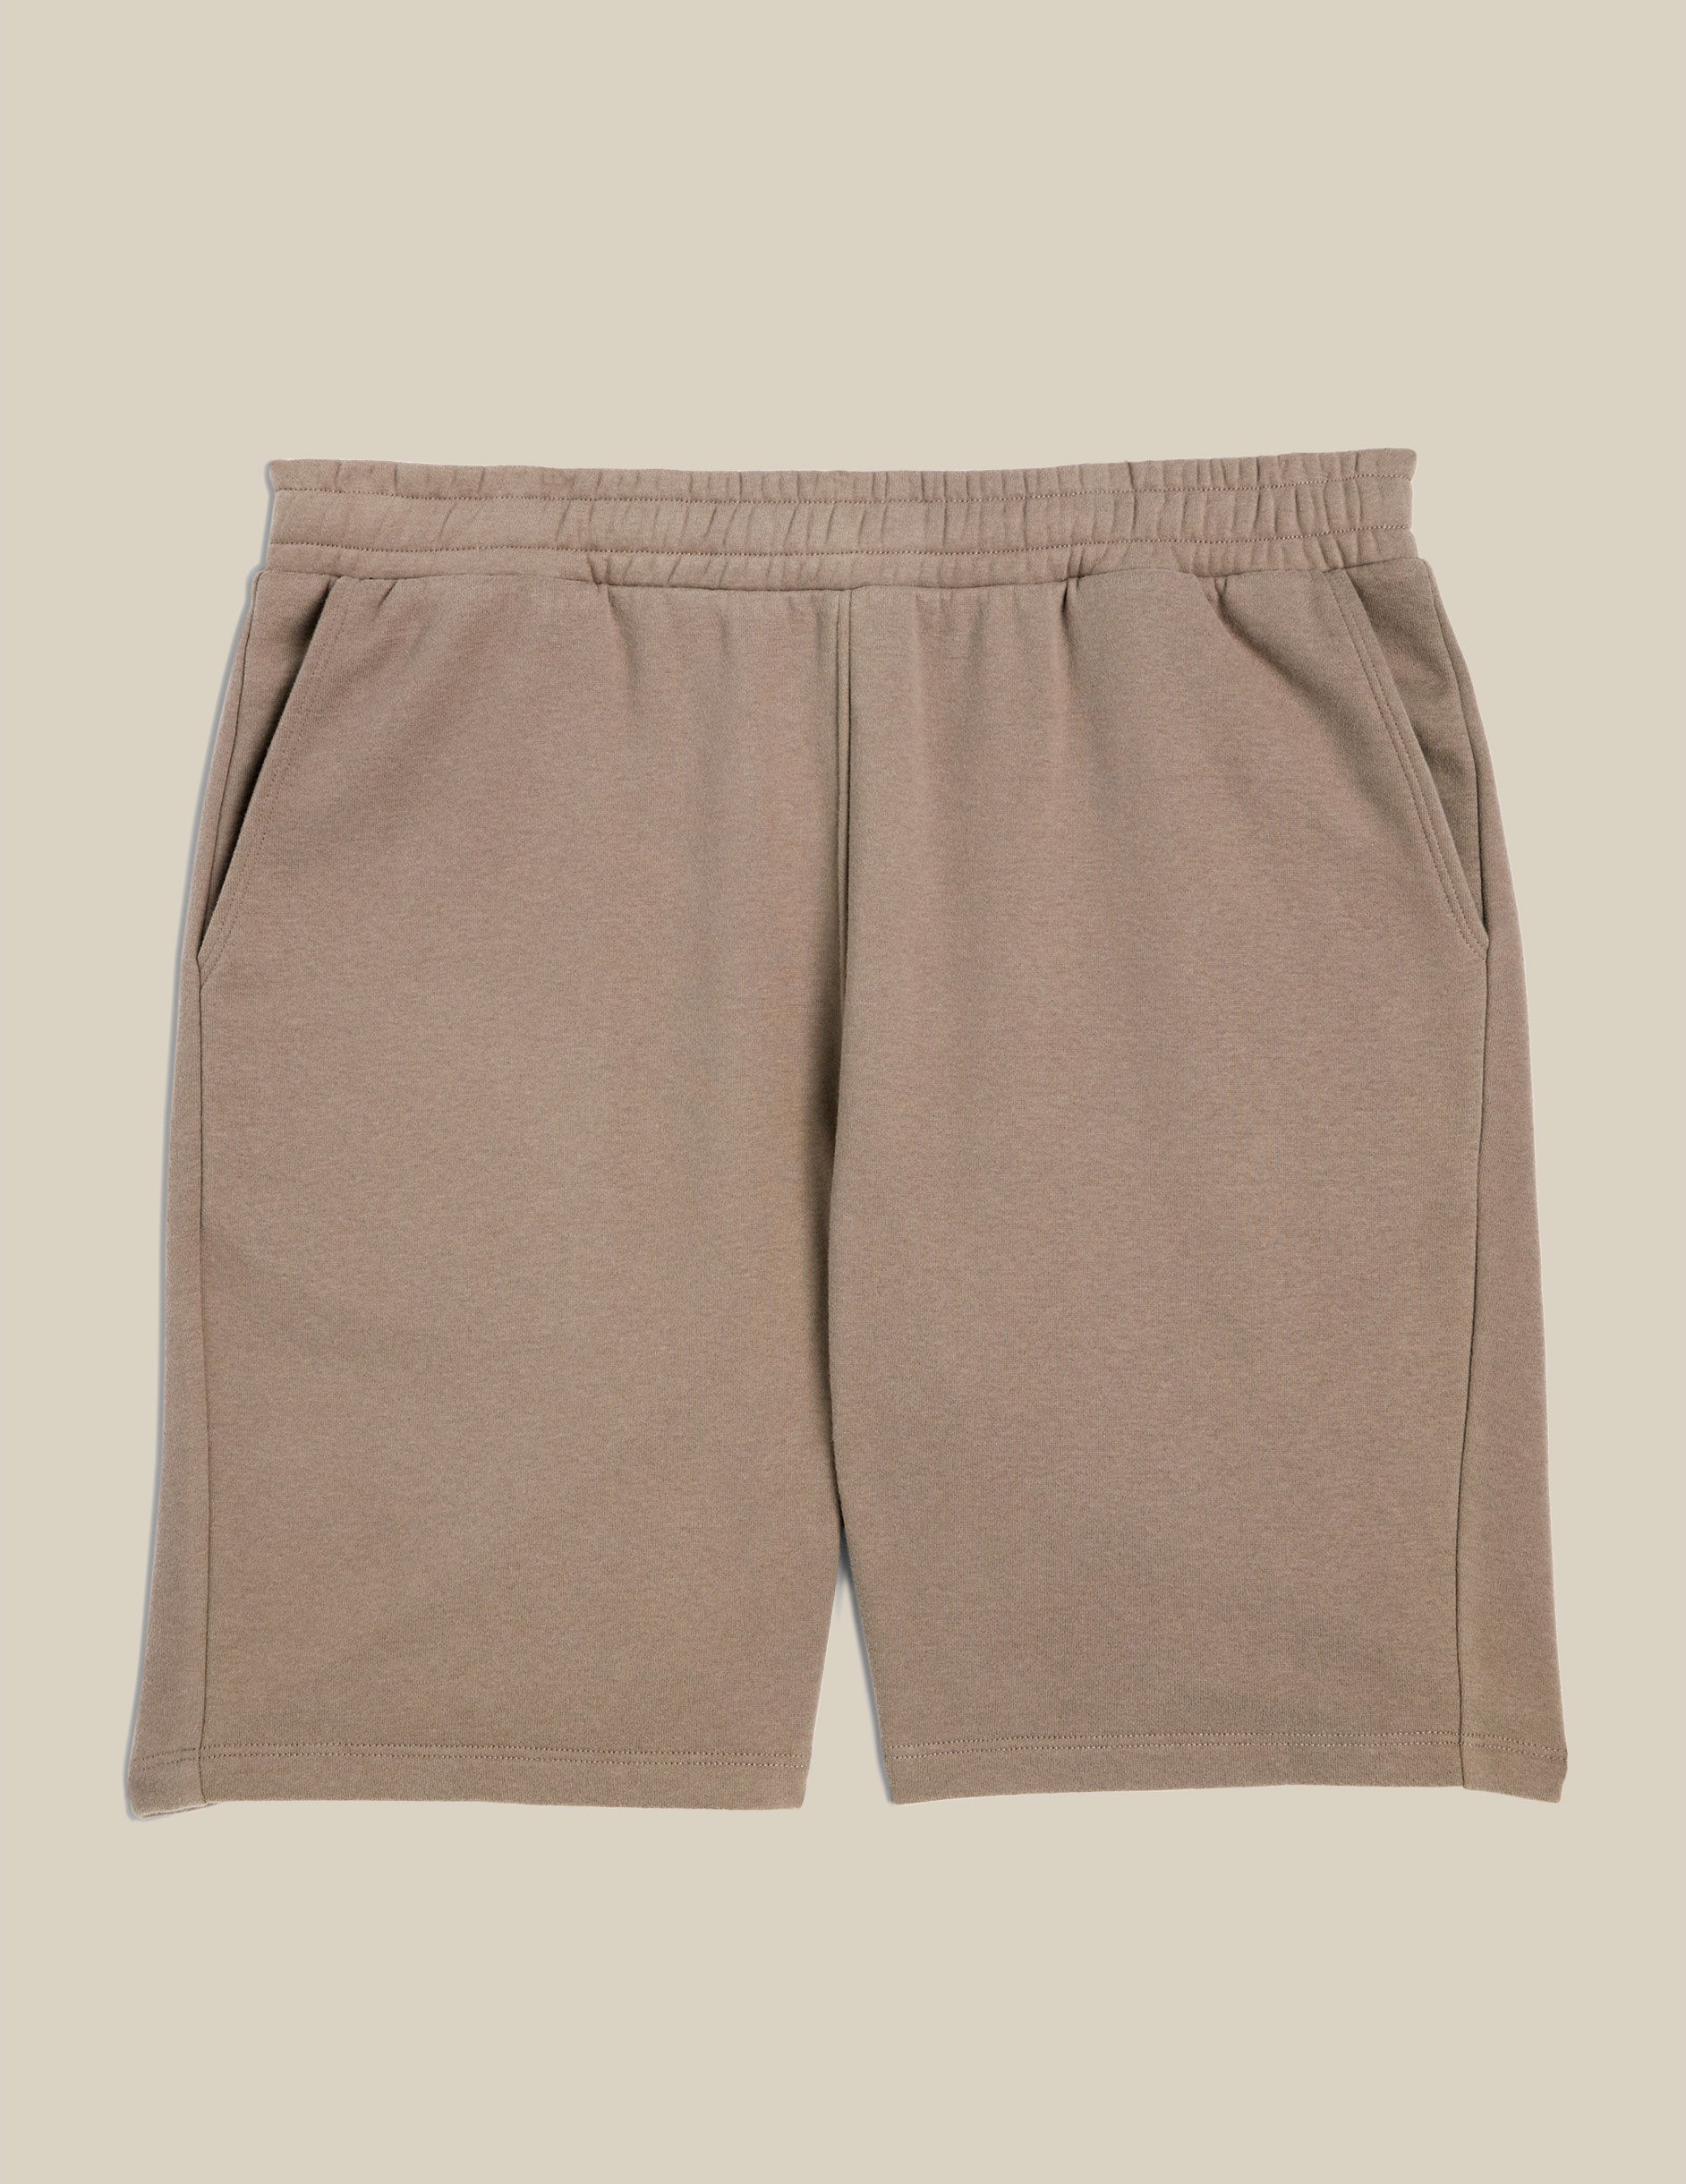 brown mens sweat shorts with pockets.